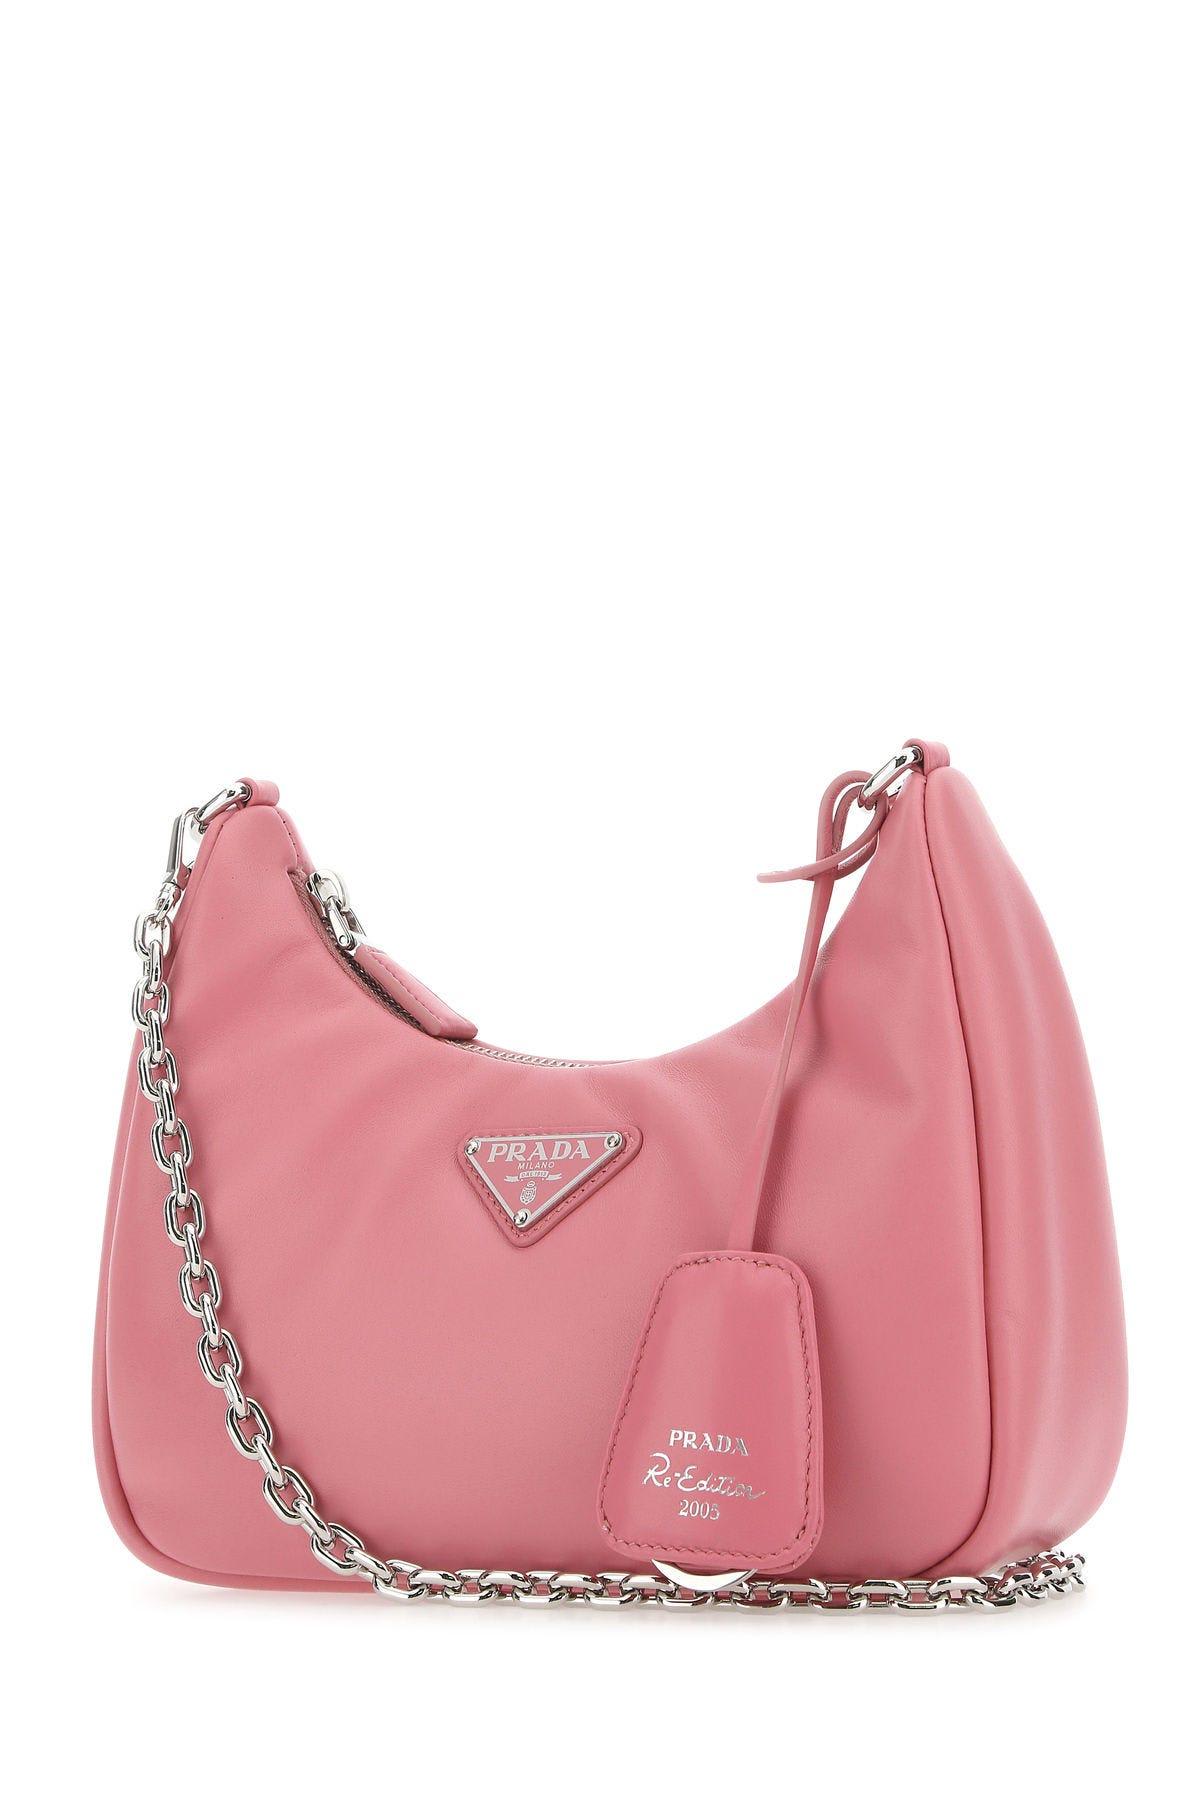 Prada Re-Edition 2005 Saffiano leather bag in pink